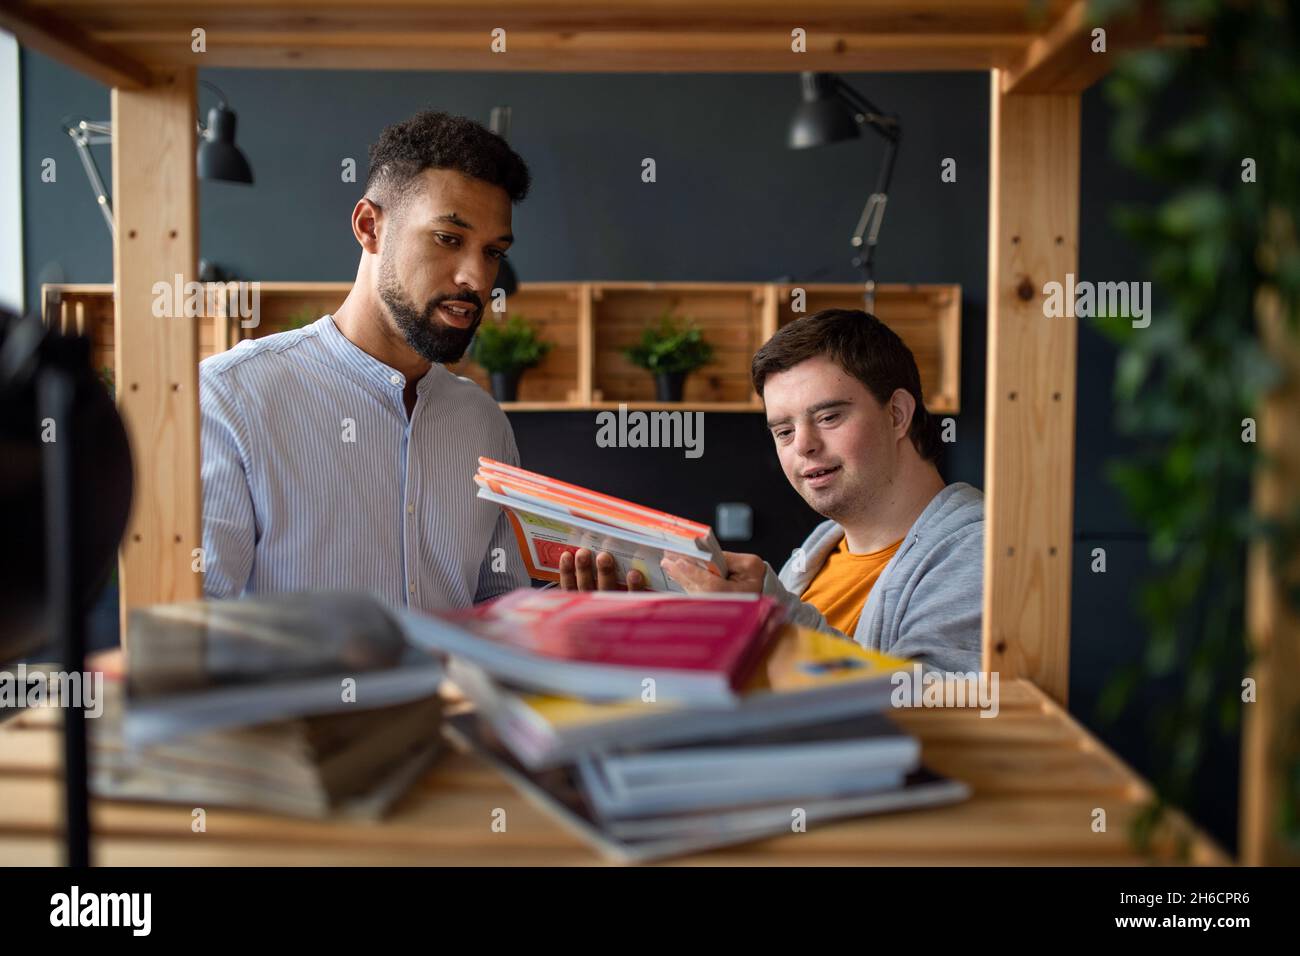 Young happy man with Down syndrome and his tutor indoors at staffroom. Stock Photo